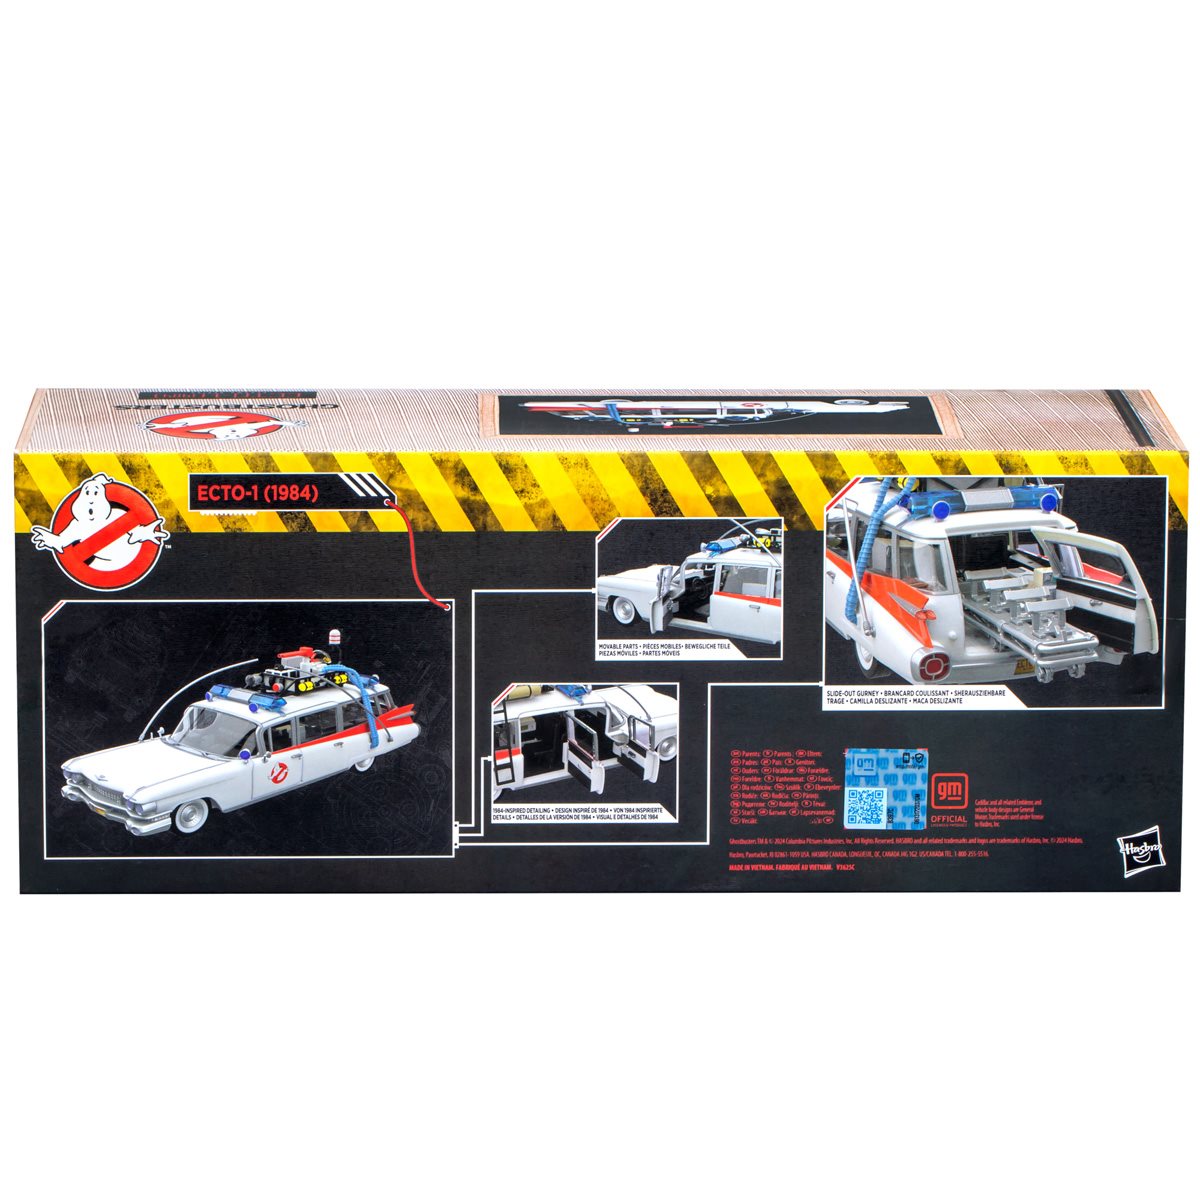 Ghostbusters (1984) Plasma Series Ecto-1 at 1:18 Scale